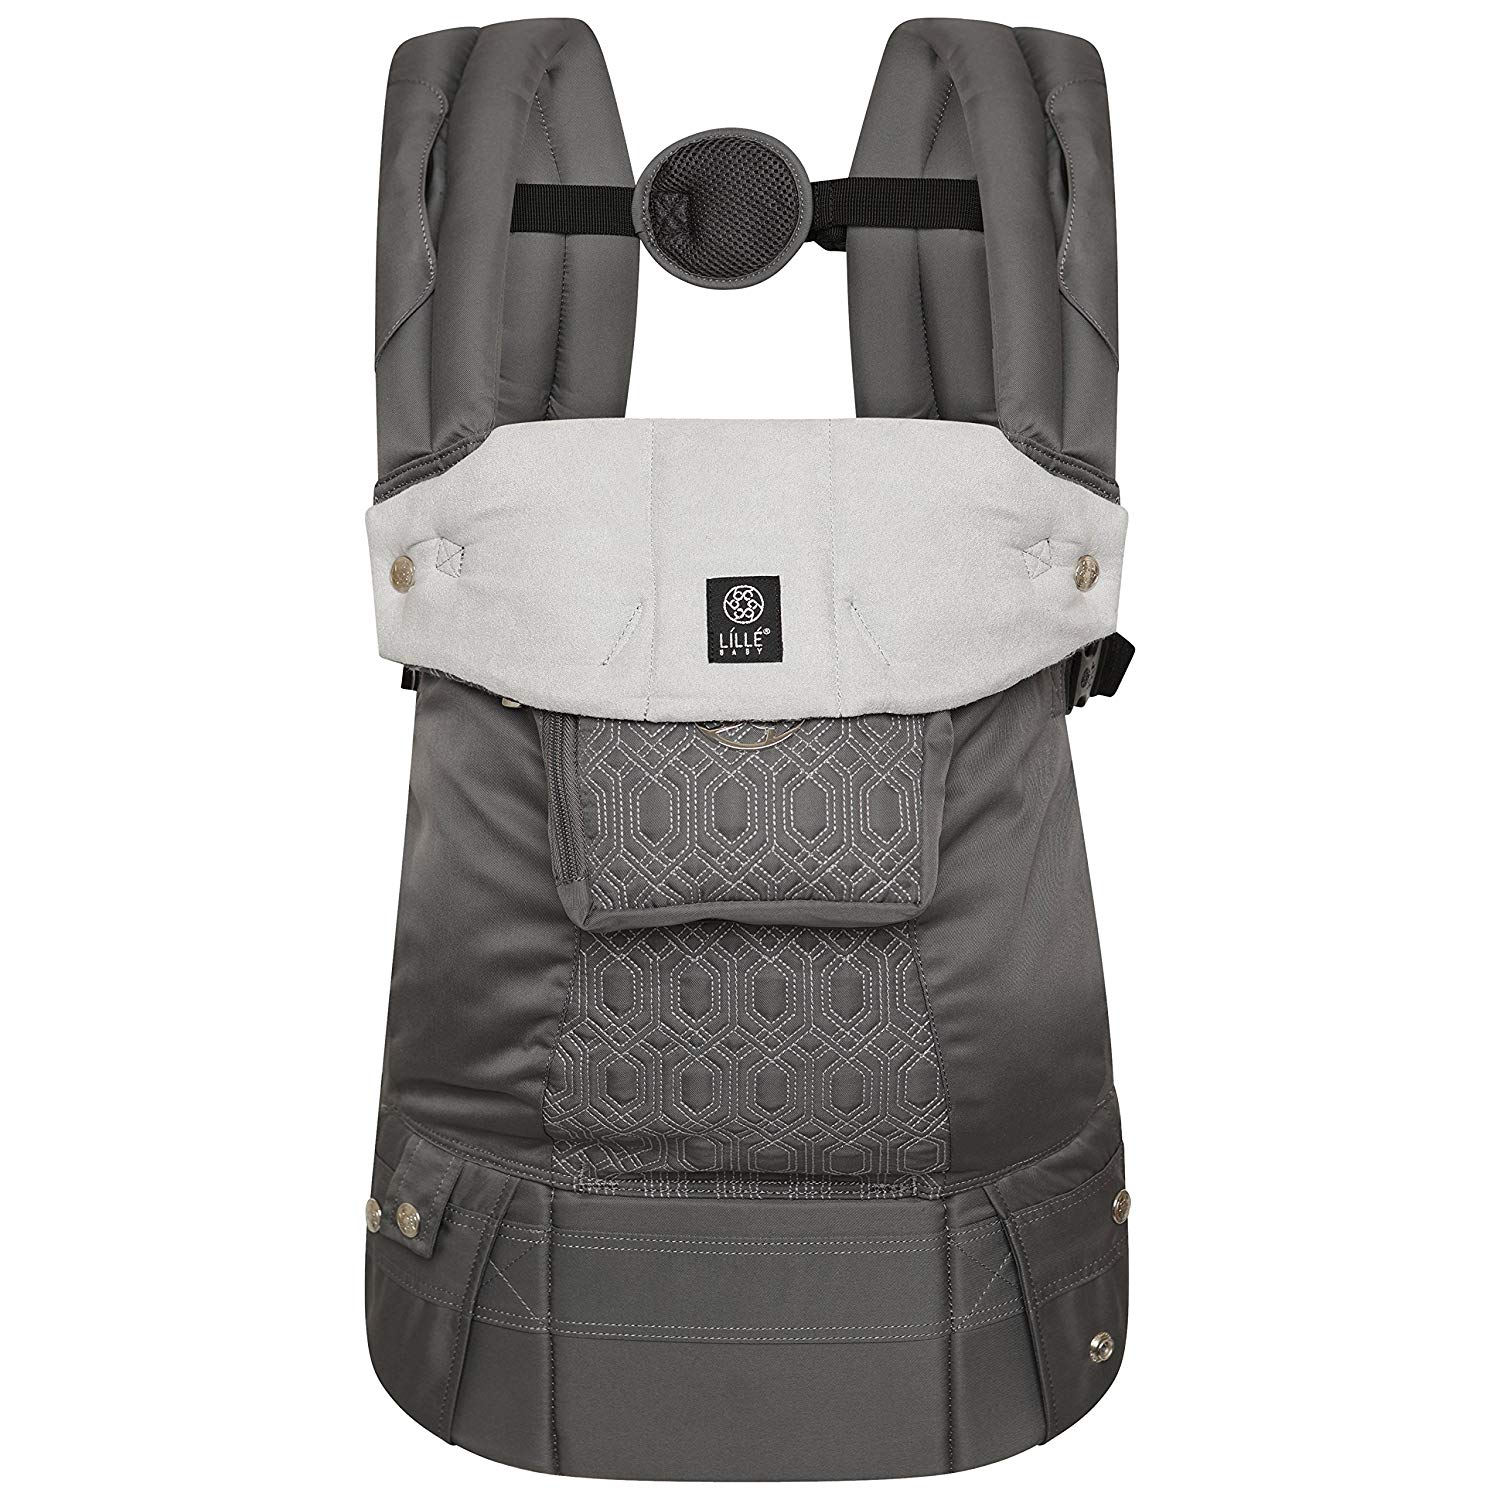 Lillebaby Baby and Child Carrier, Mystique Grey